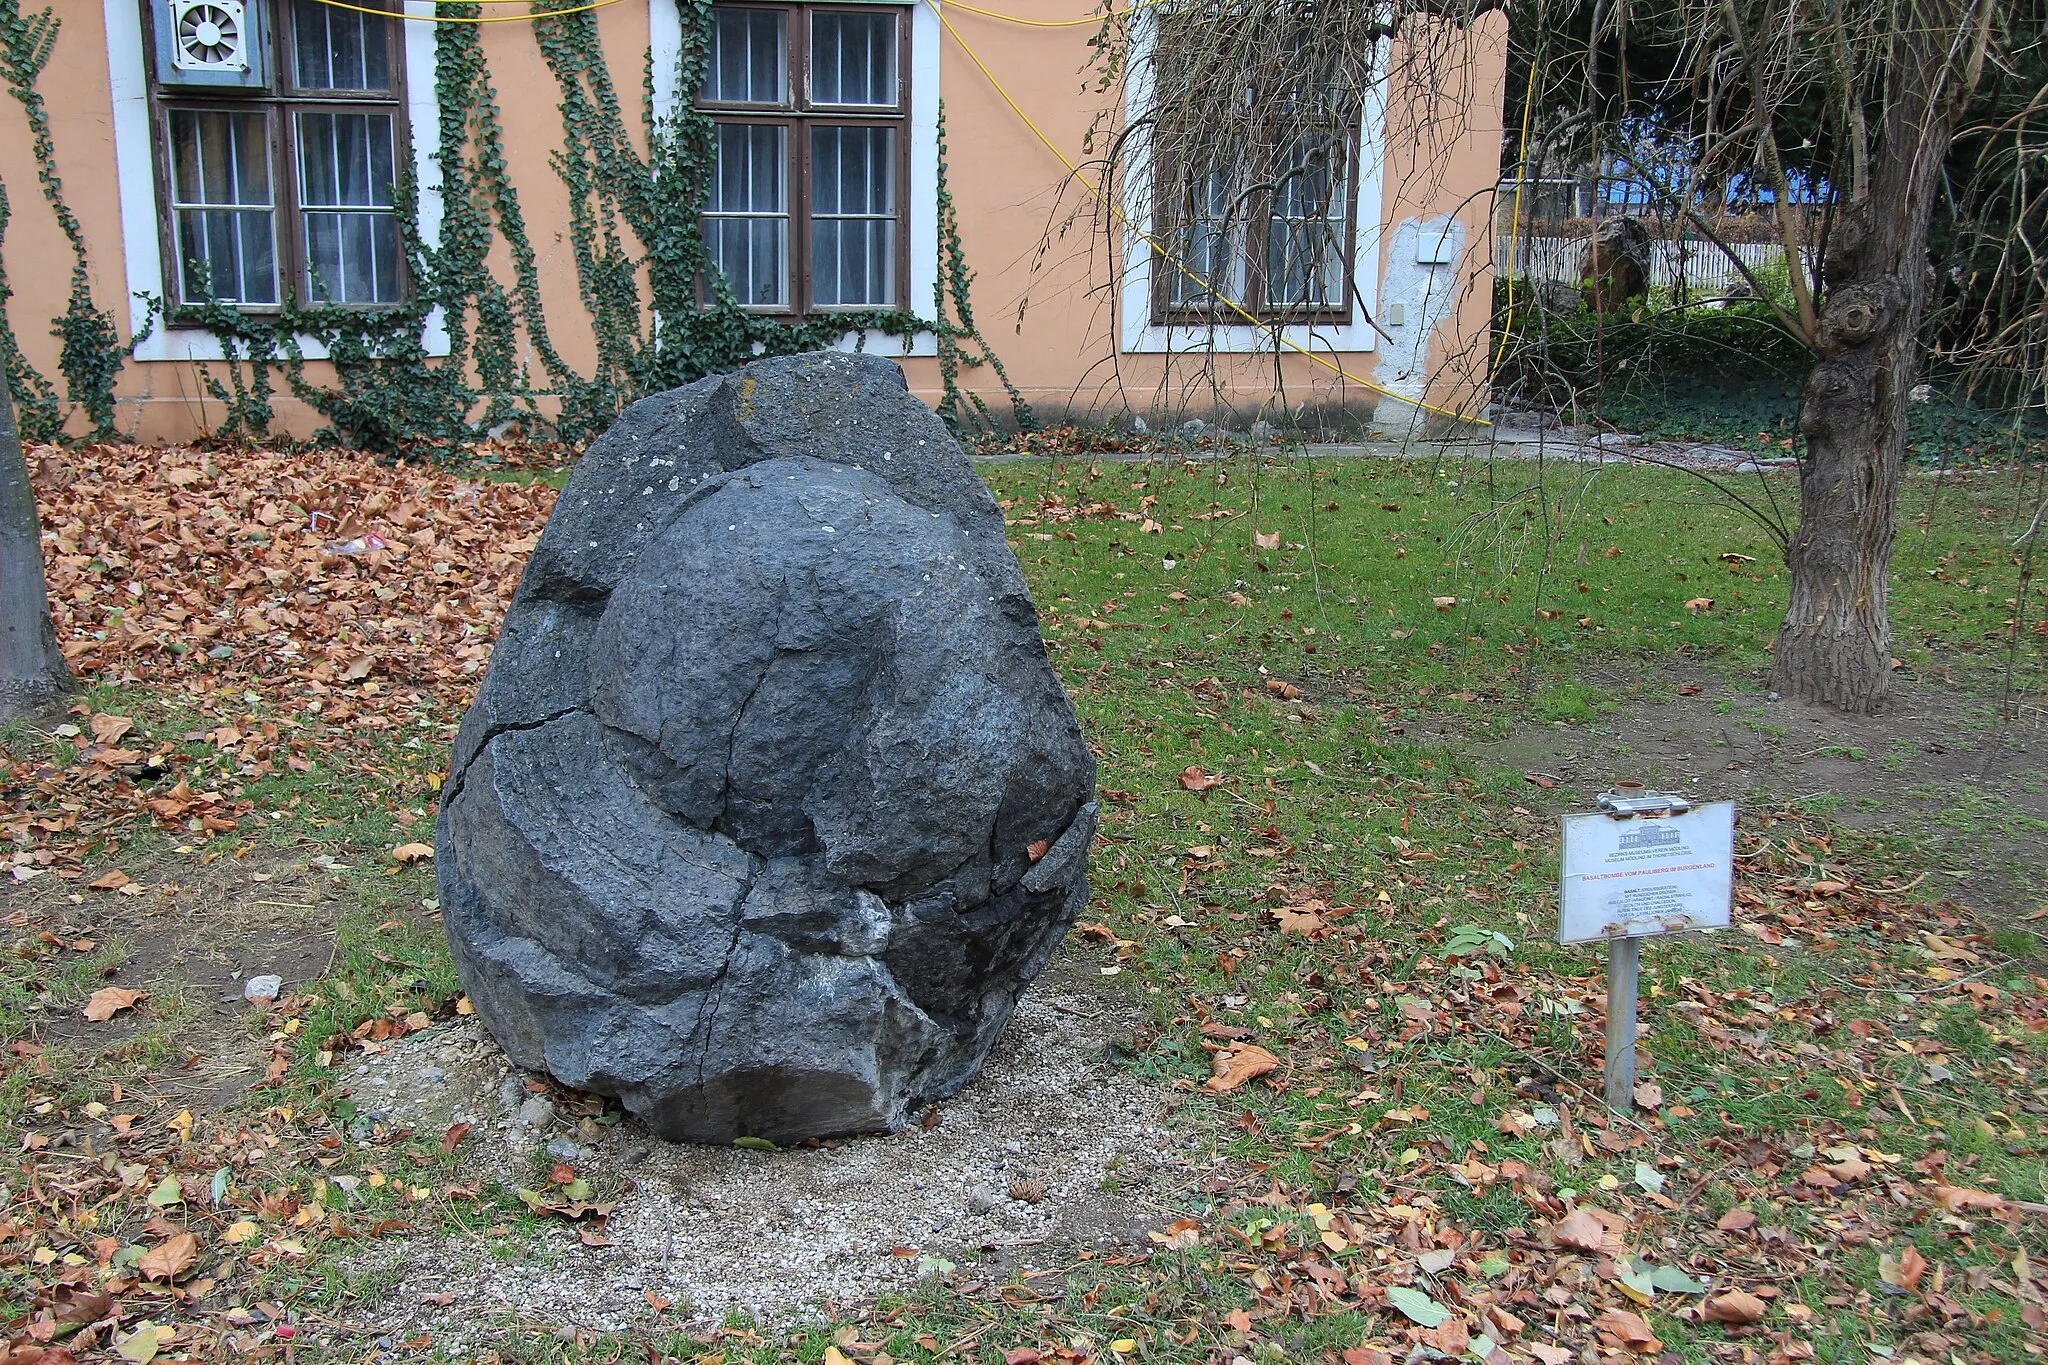 Photo showing: Volcanic bomb of basalt from Pauliberg extinct volcano in the Burgenland area of Austria. The lava bomb is displayed in the grounds of the museum at Mödling, Austria.